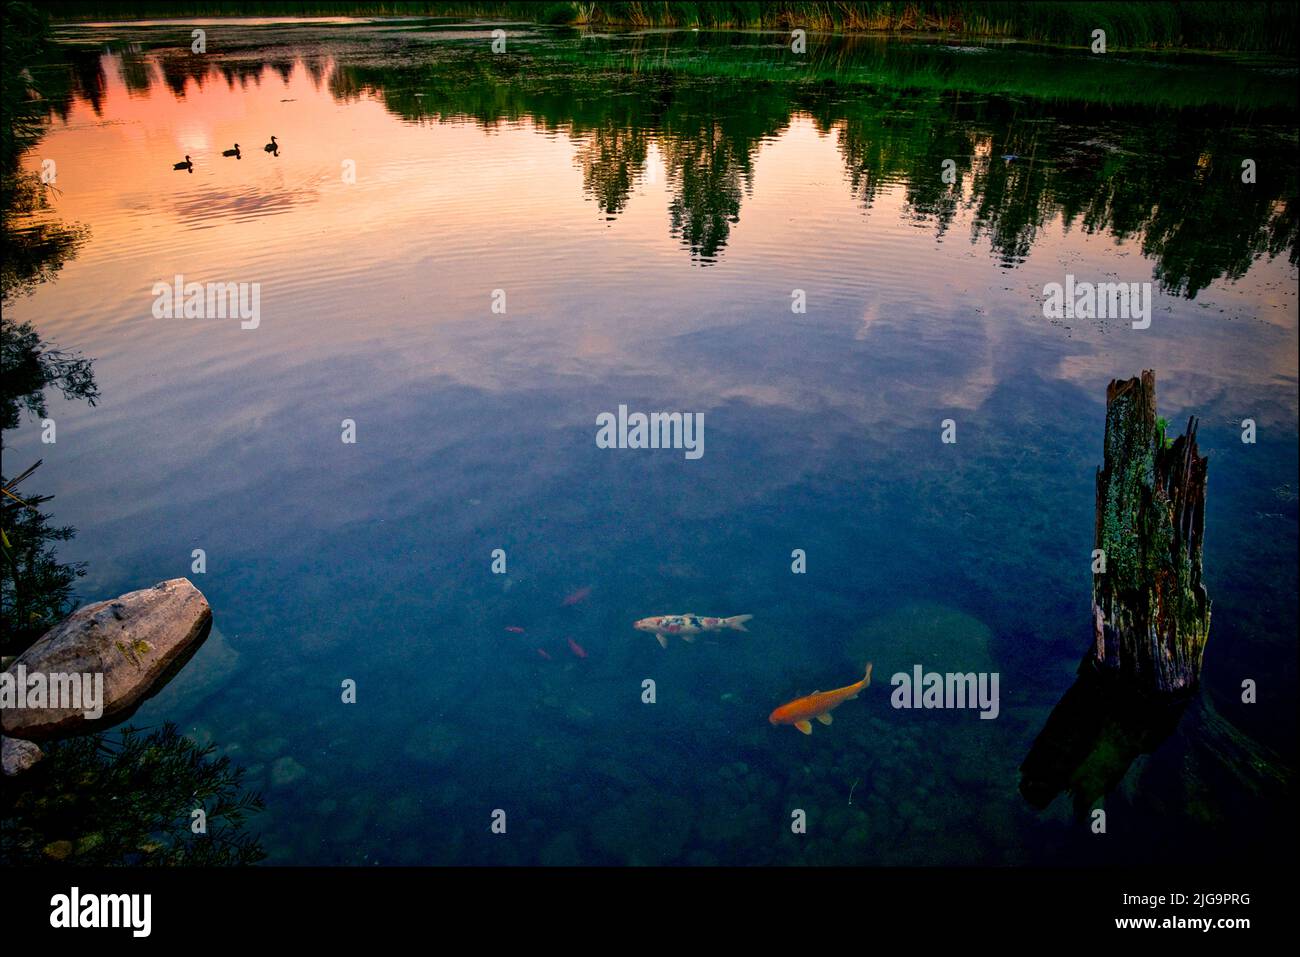 Koi fishes swimming in the pond at twilight Stock Photo